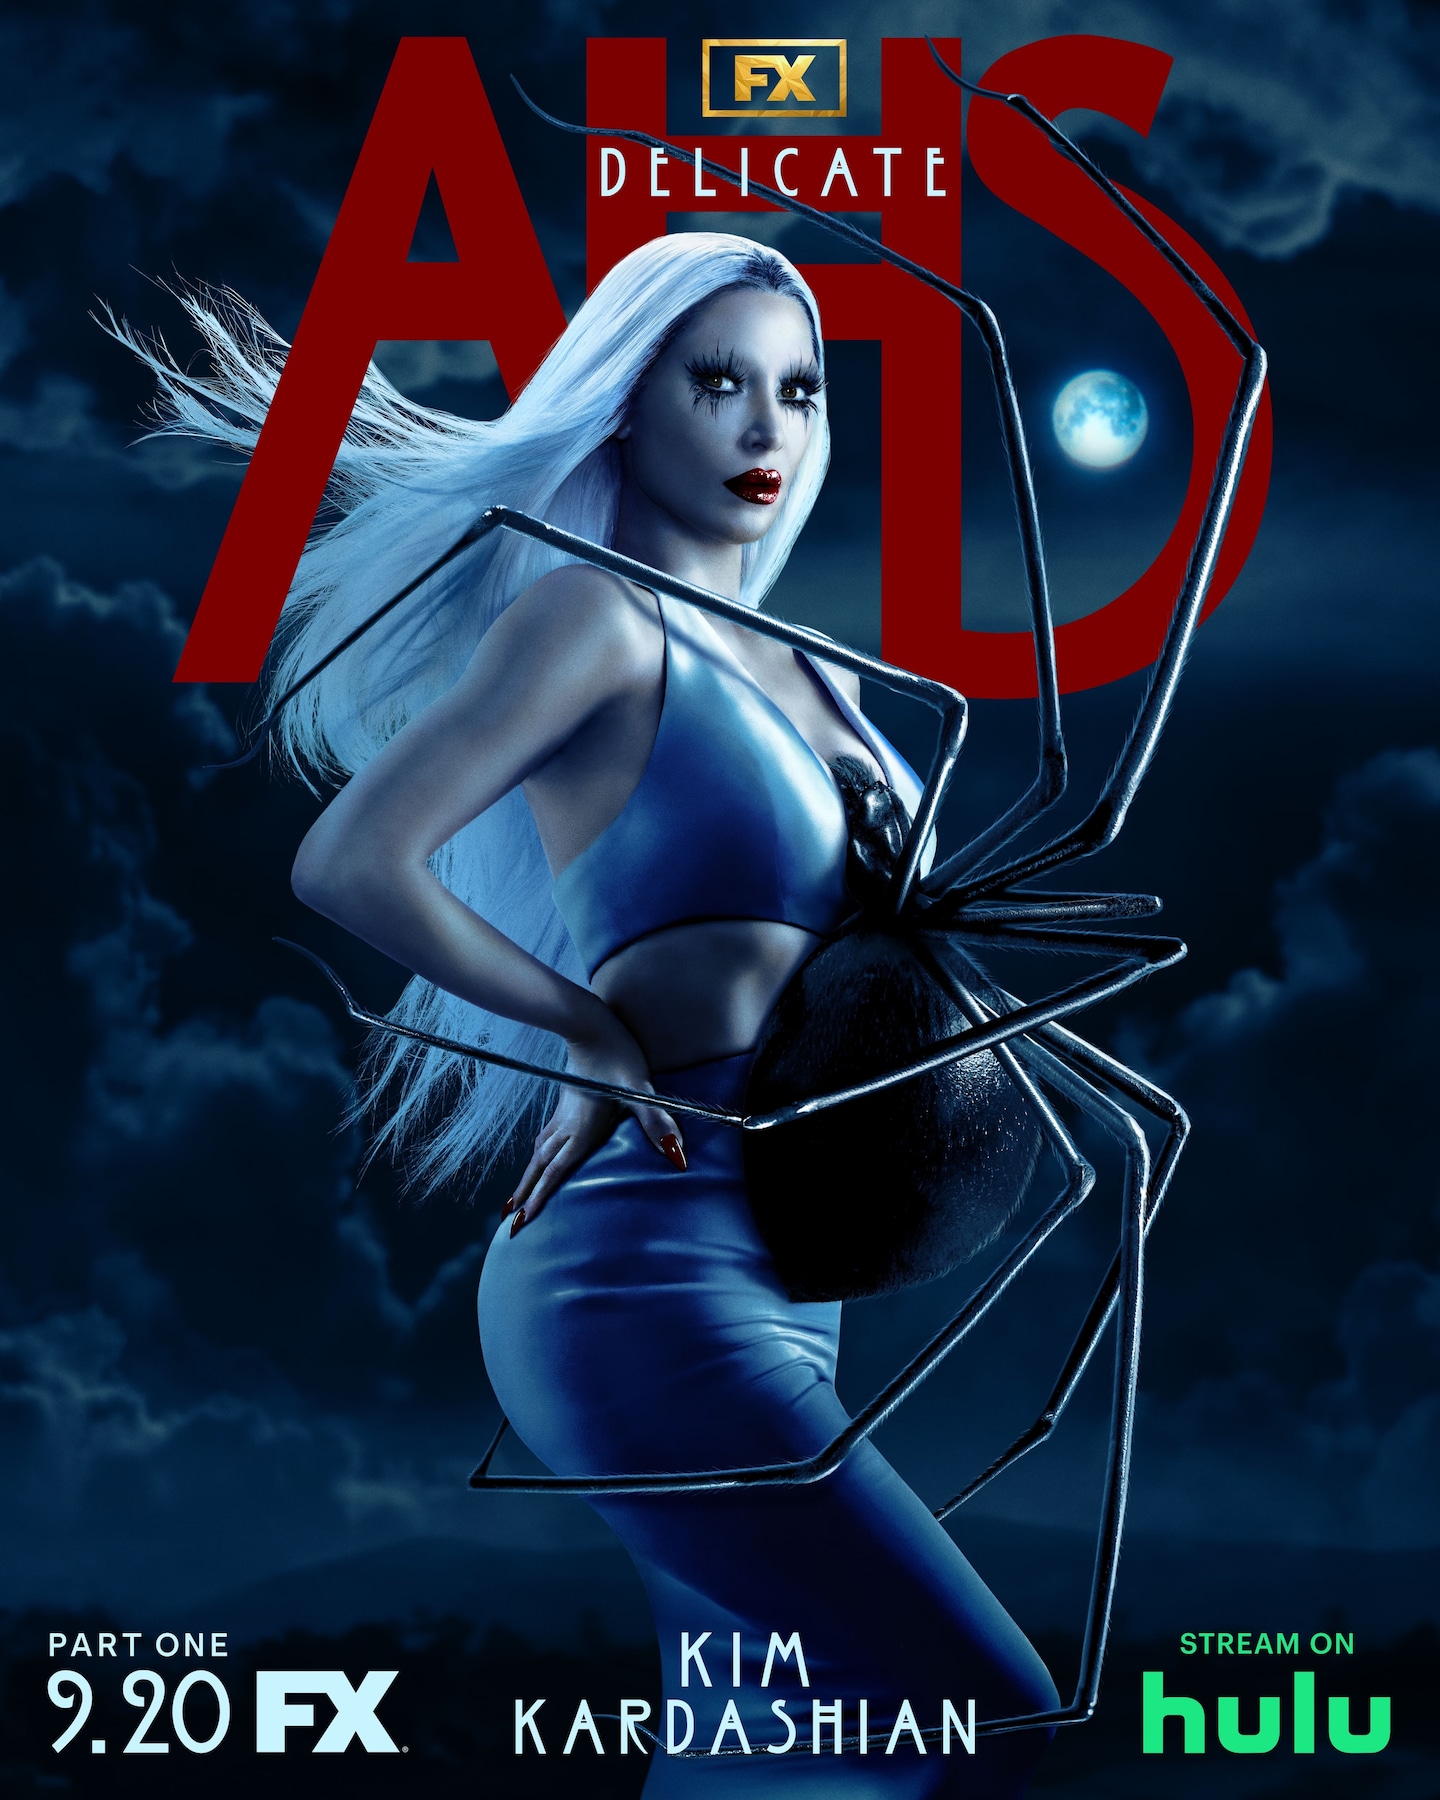 A woman with white hair standing with a spider on her stomach, in front of a dark and cloudy background for AHS: Delicate